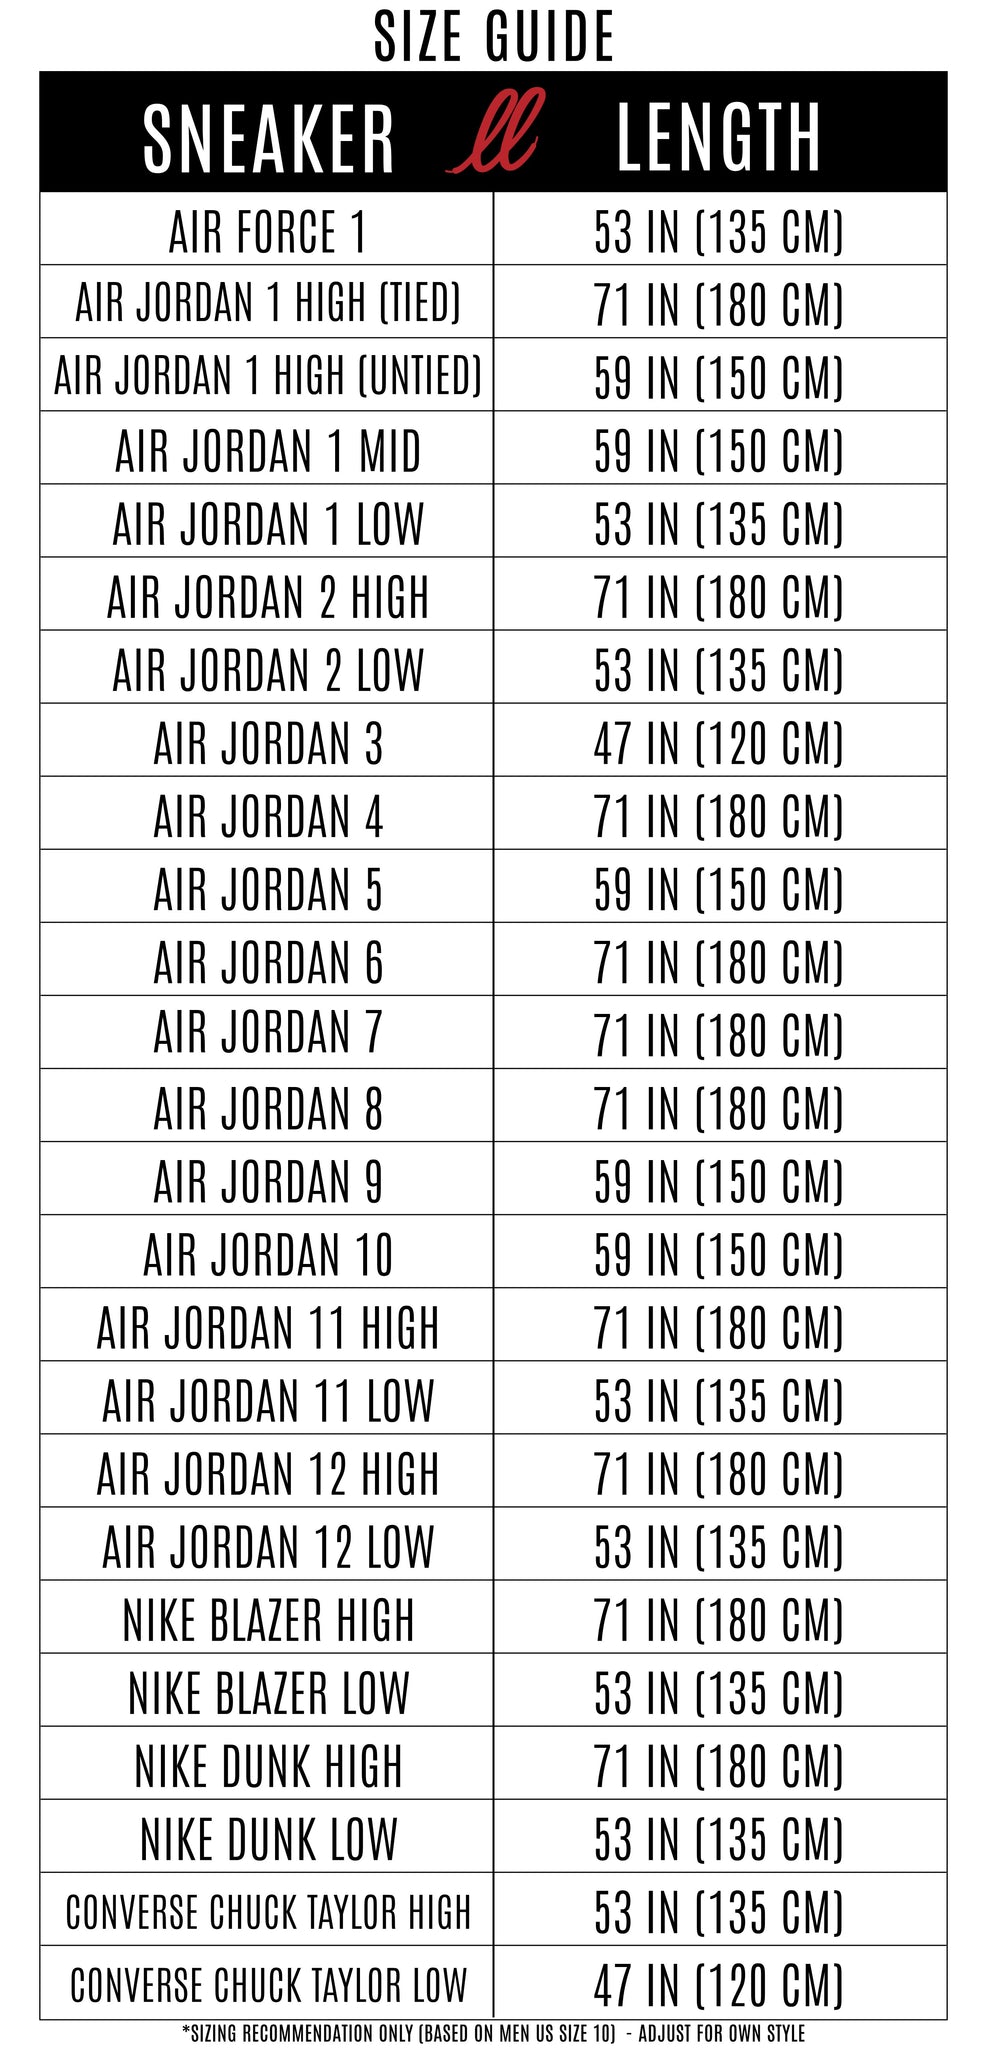 Looped Laces Size Guide for popular sneakers include Air Jordan, Nike Blazer, Nike Dunk and Converse